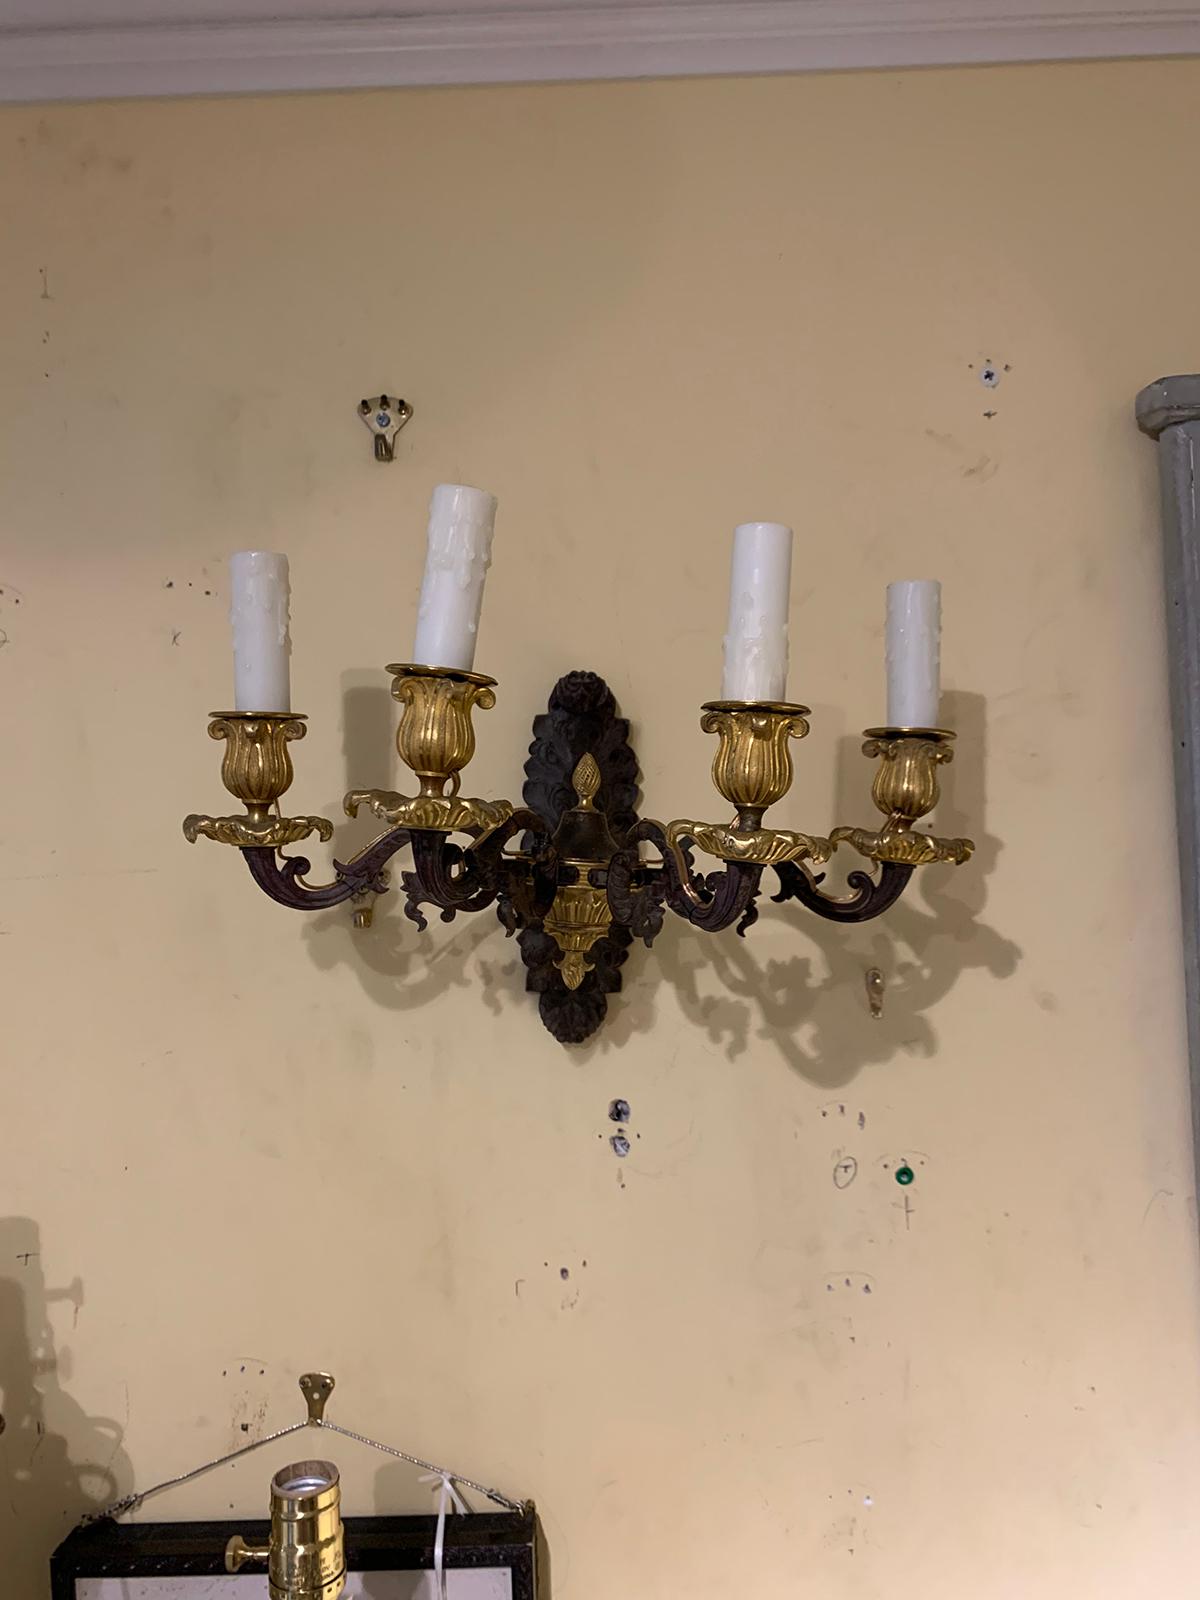 Pair of 19th century French empire style four-arm sconces
New wiring.